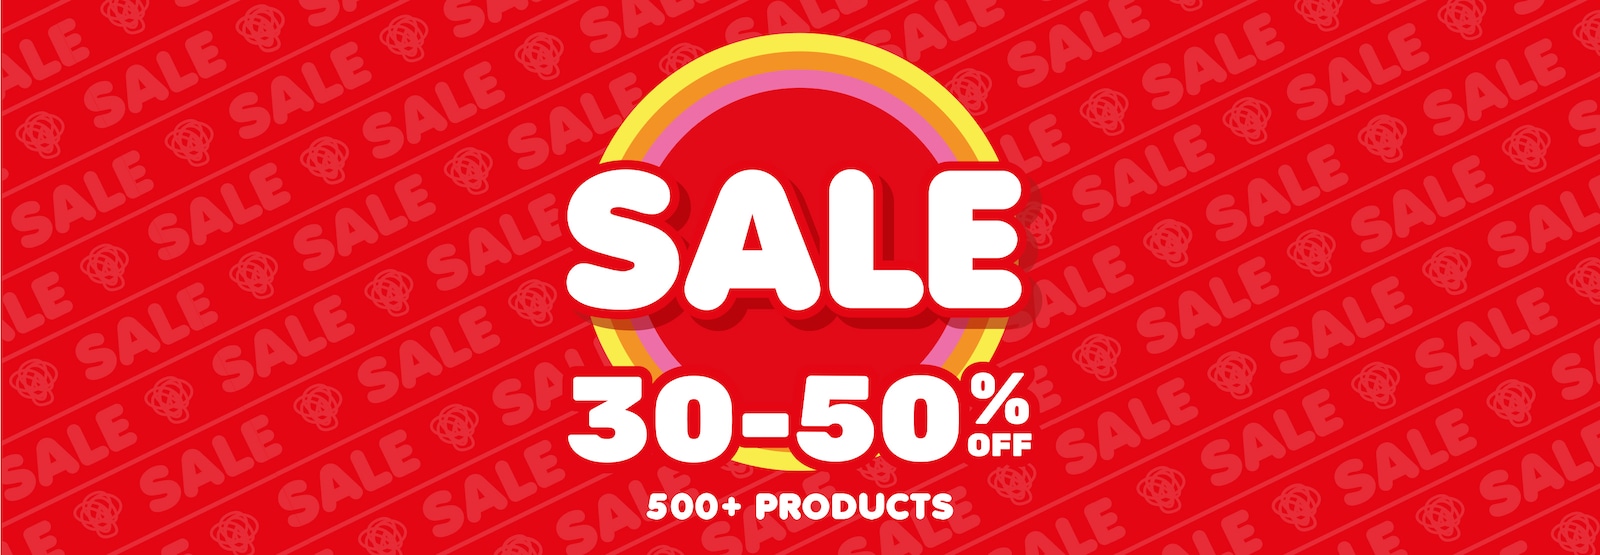 SALE 30-50% off 500+ Products